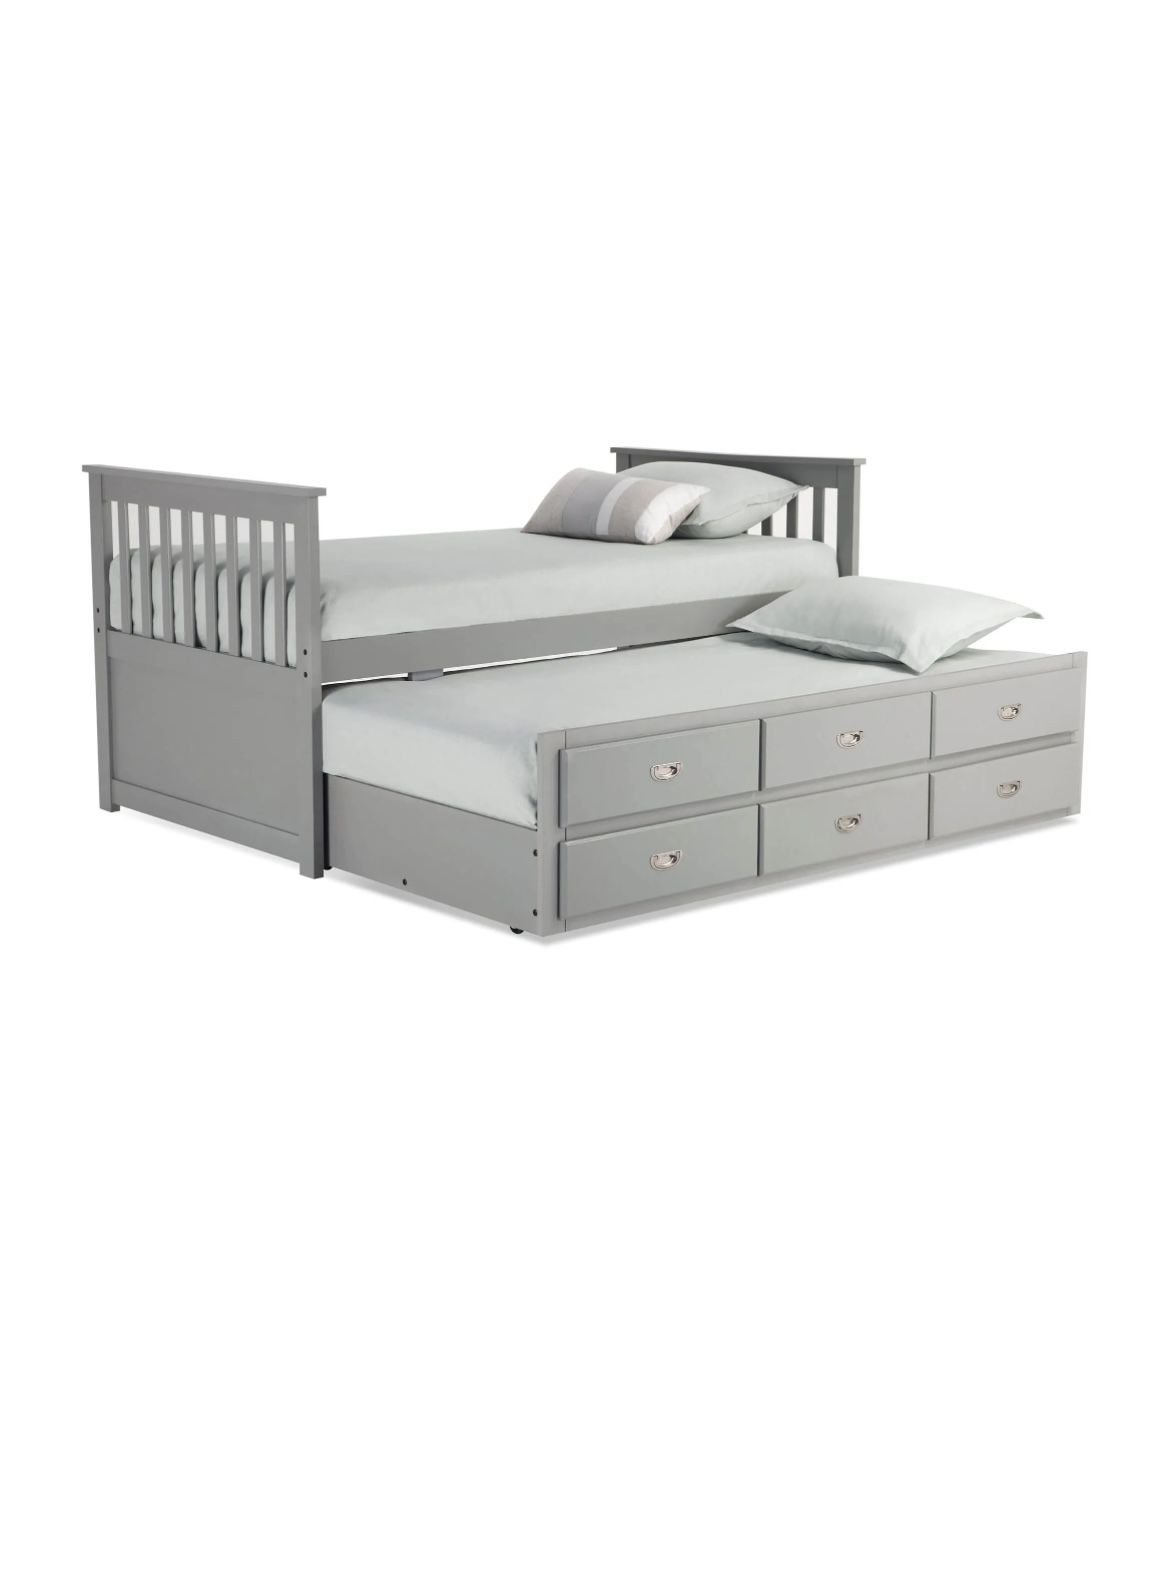 Captain Twin Bed Frame